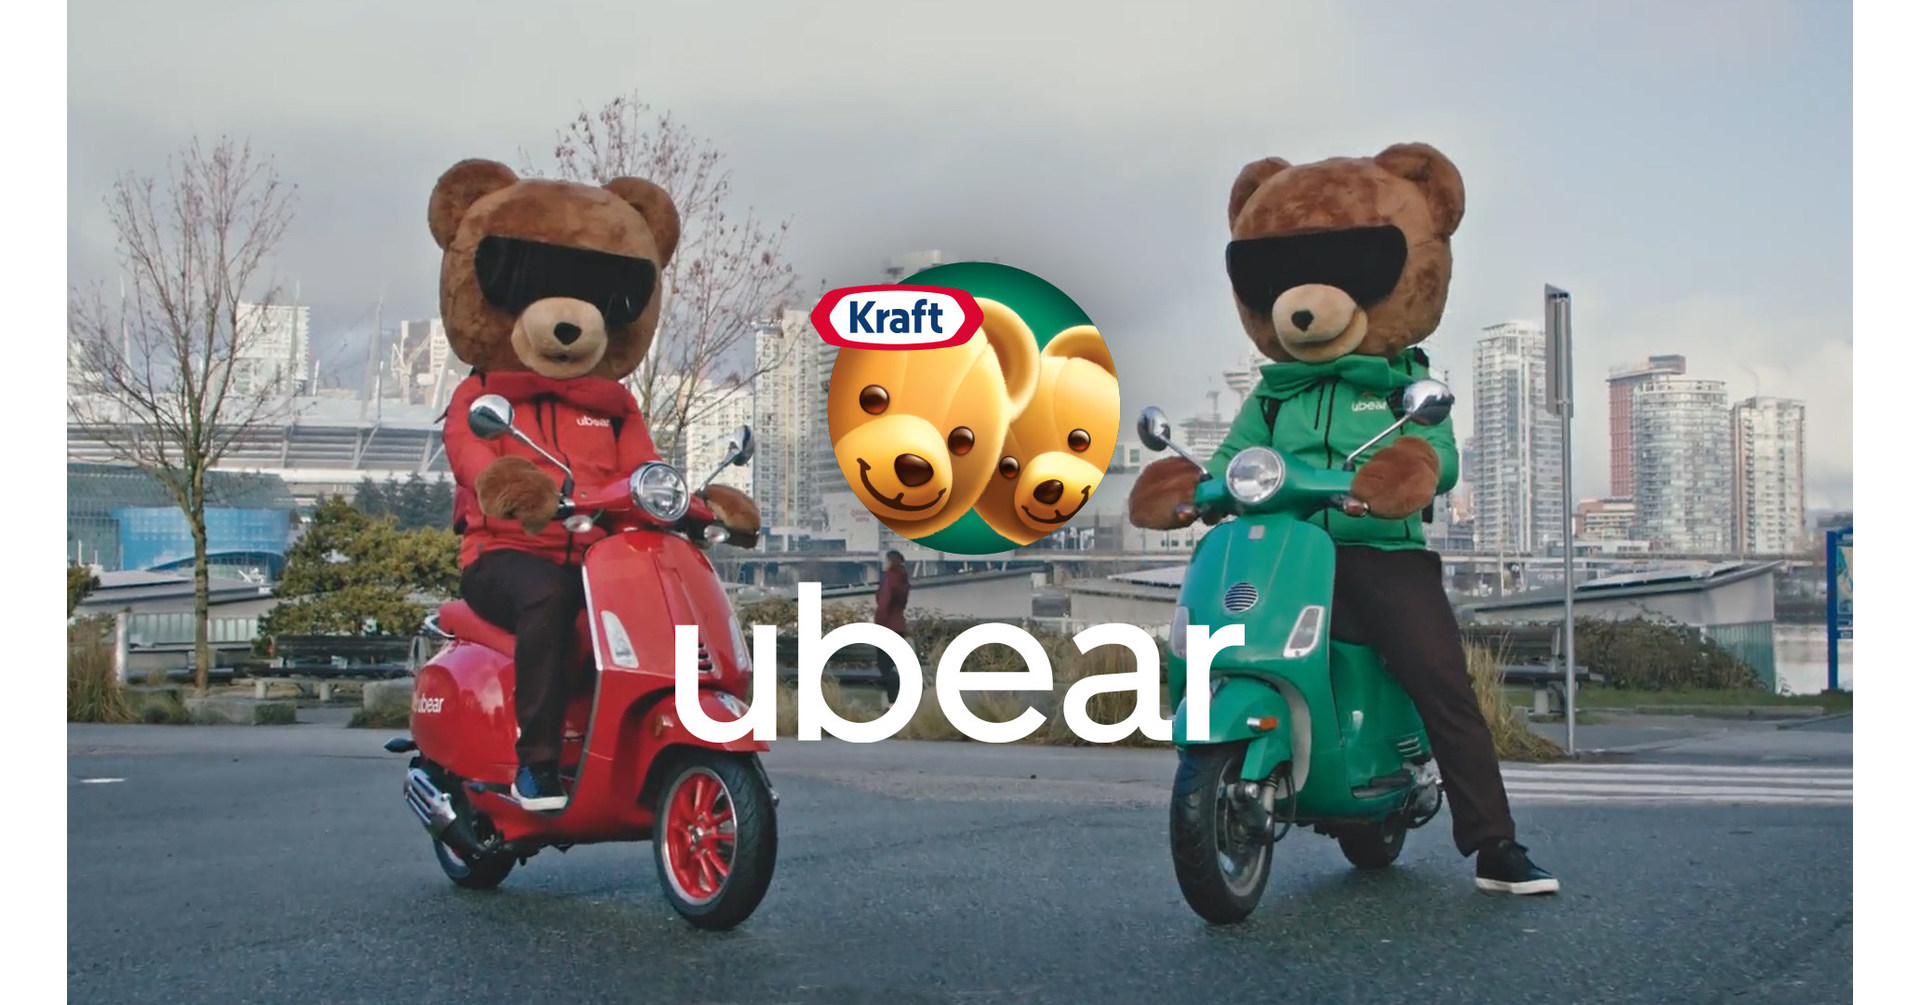 Download Kraft Peanut Butter Launches Ubear The First Delivery Service Run By Bears